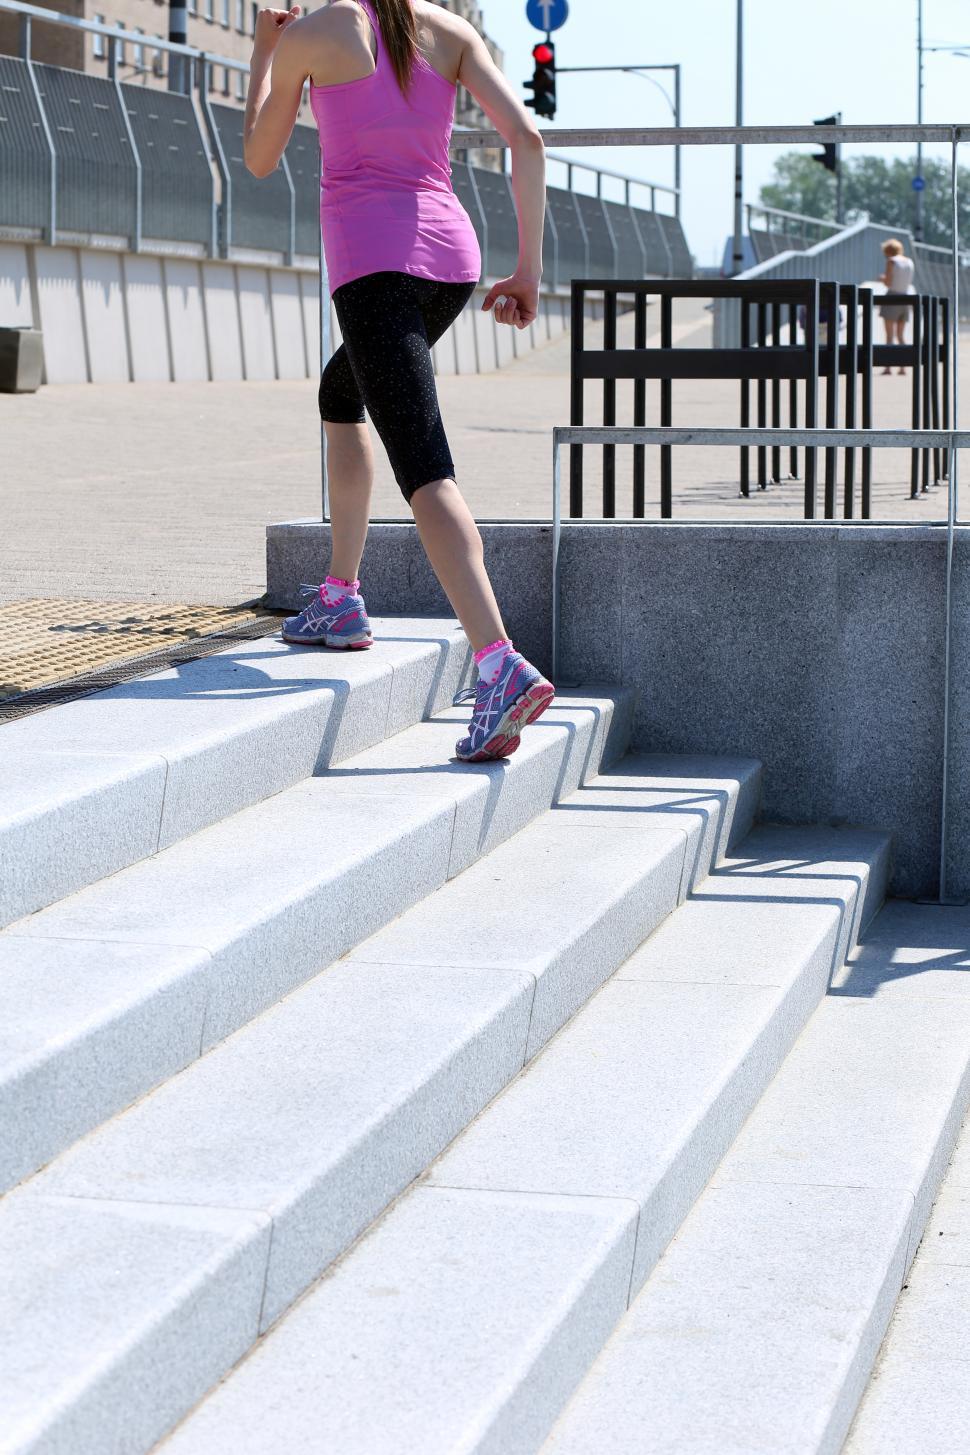 Free Image of Sport. Girl running up stairs 